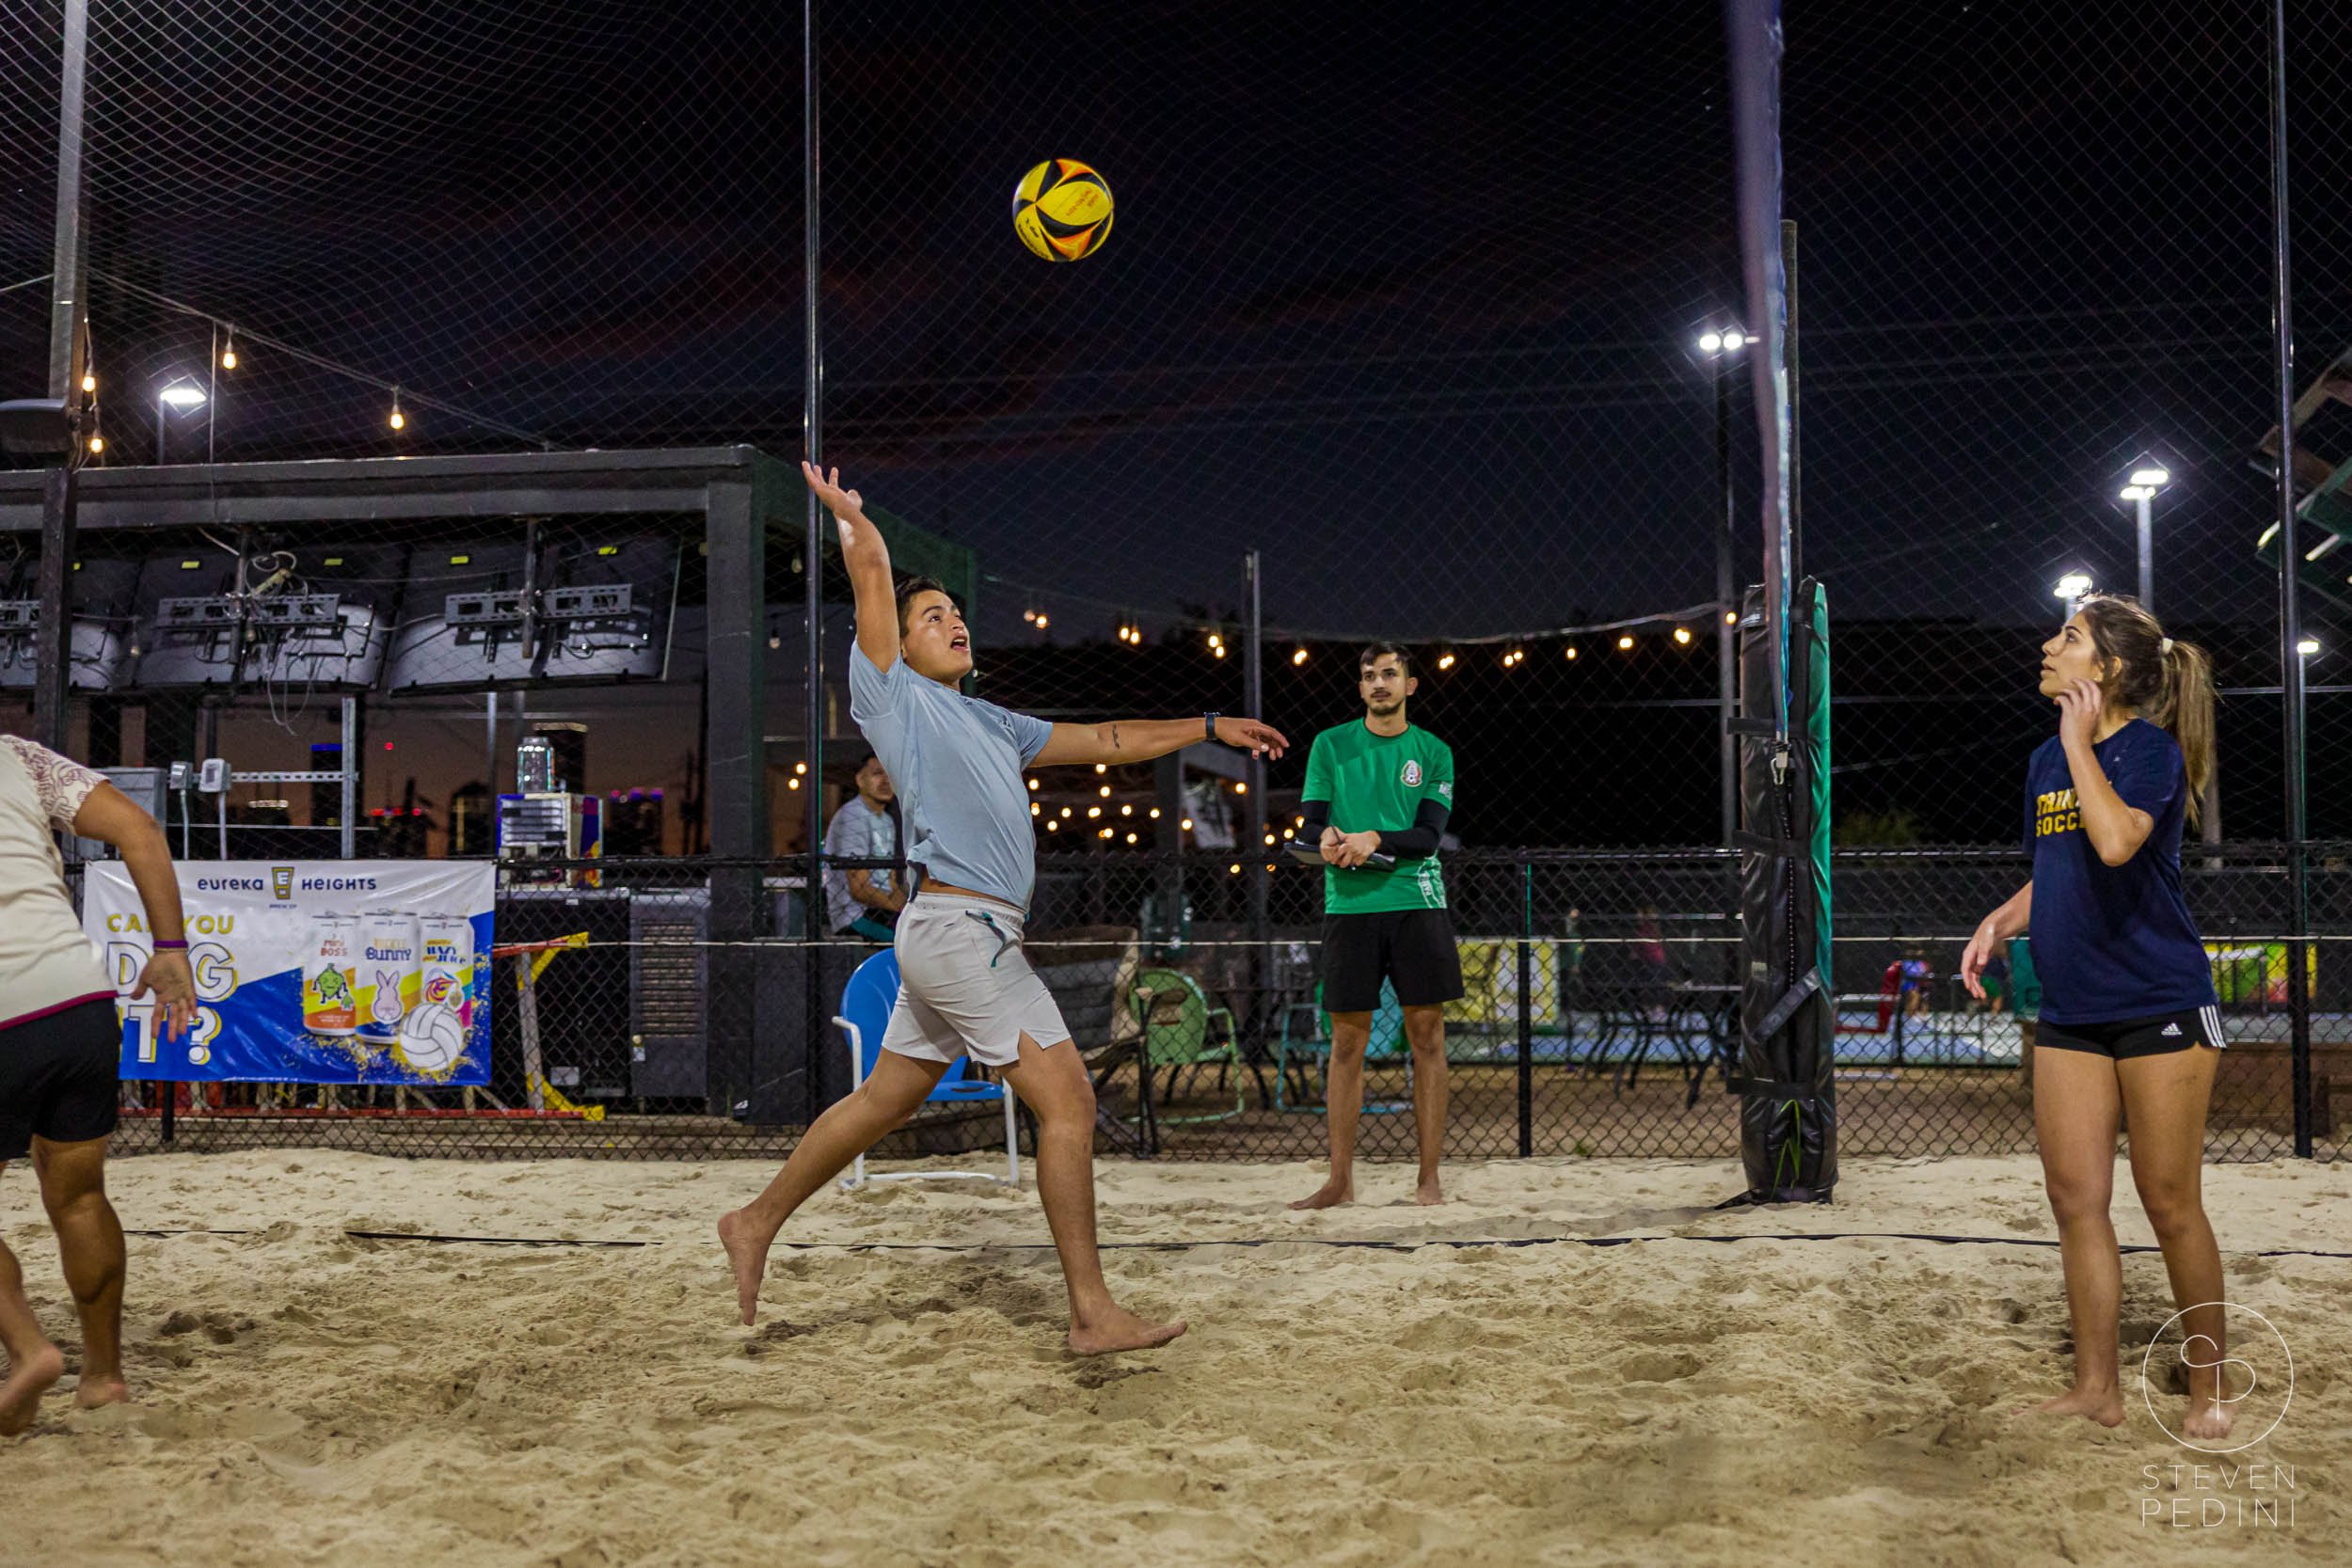 Steven Pedini Photography - Bumpy Pickle - Sand Volleyball - Houston TX - World Cup of Volleyball - 00378.jpg